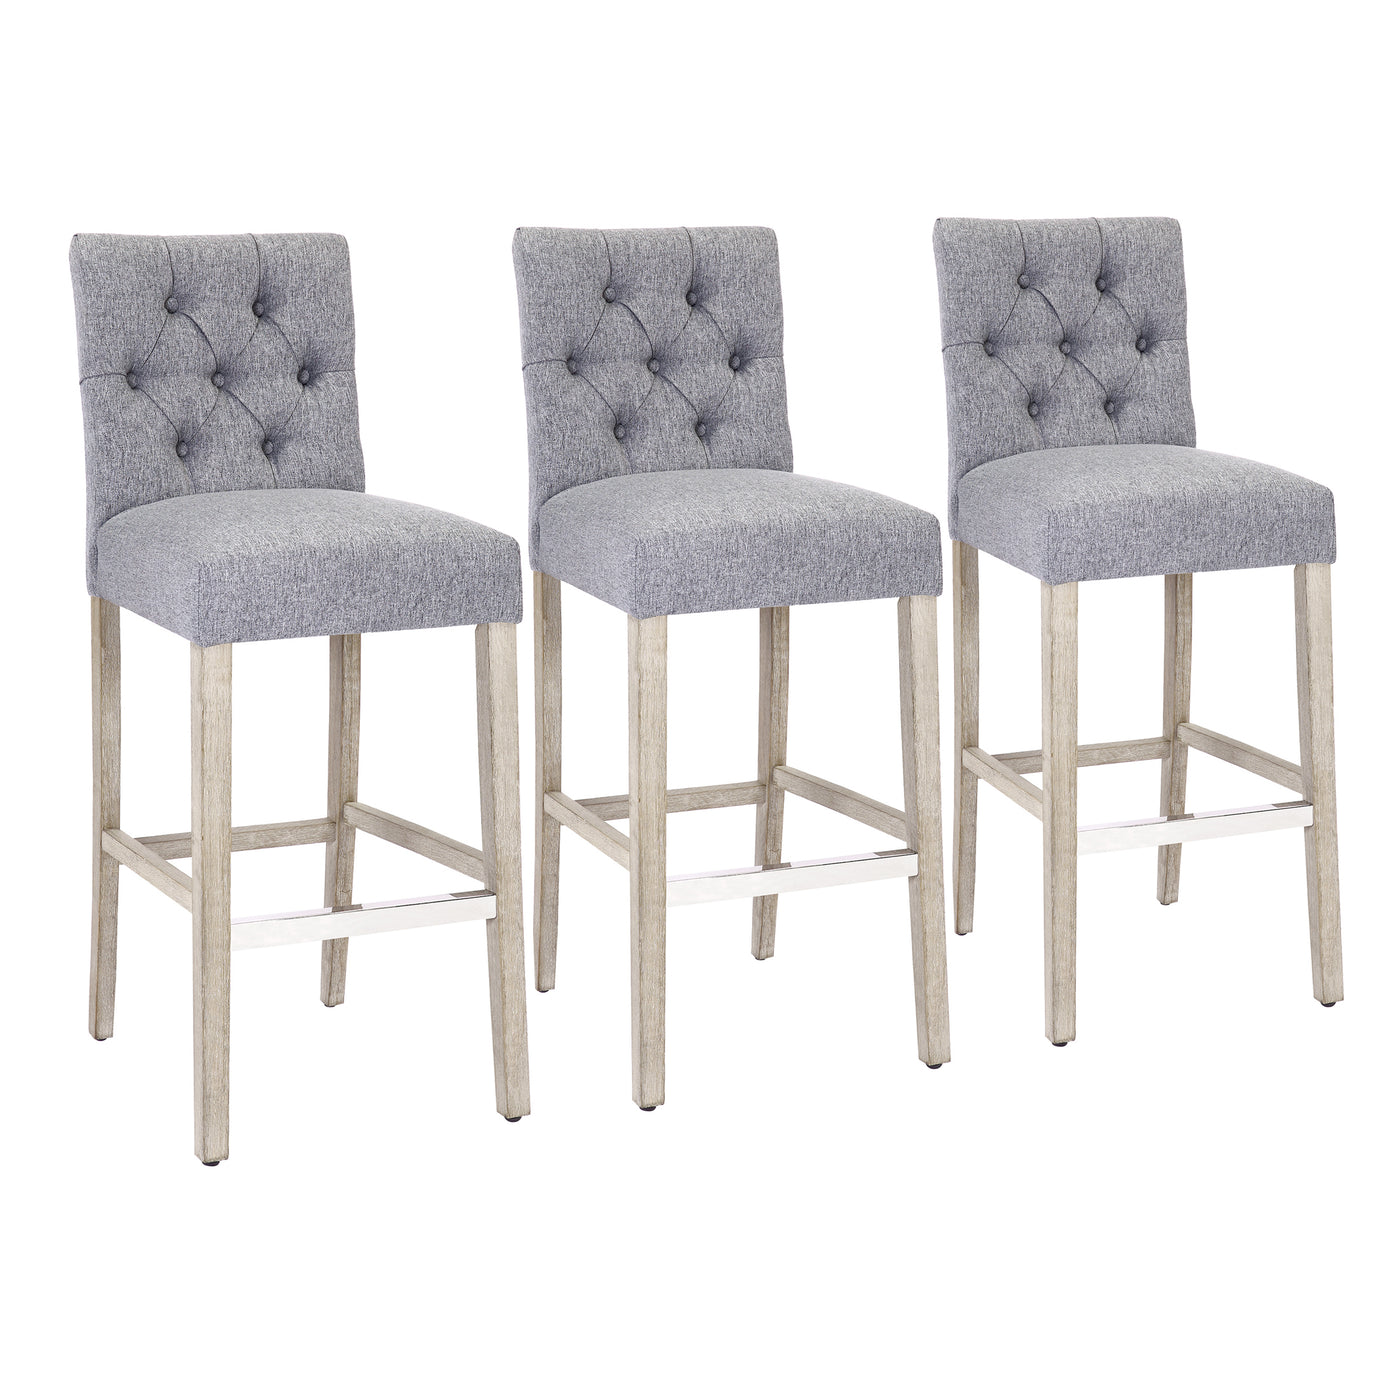 Hayes 29" Linen Fabric Tufted Bar Stool (Set of 3), Antique Gray